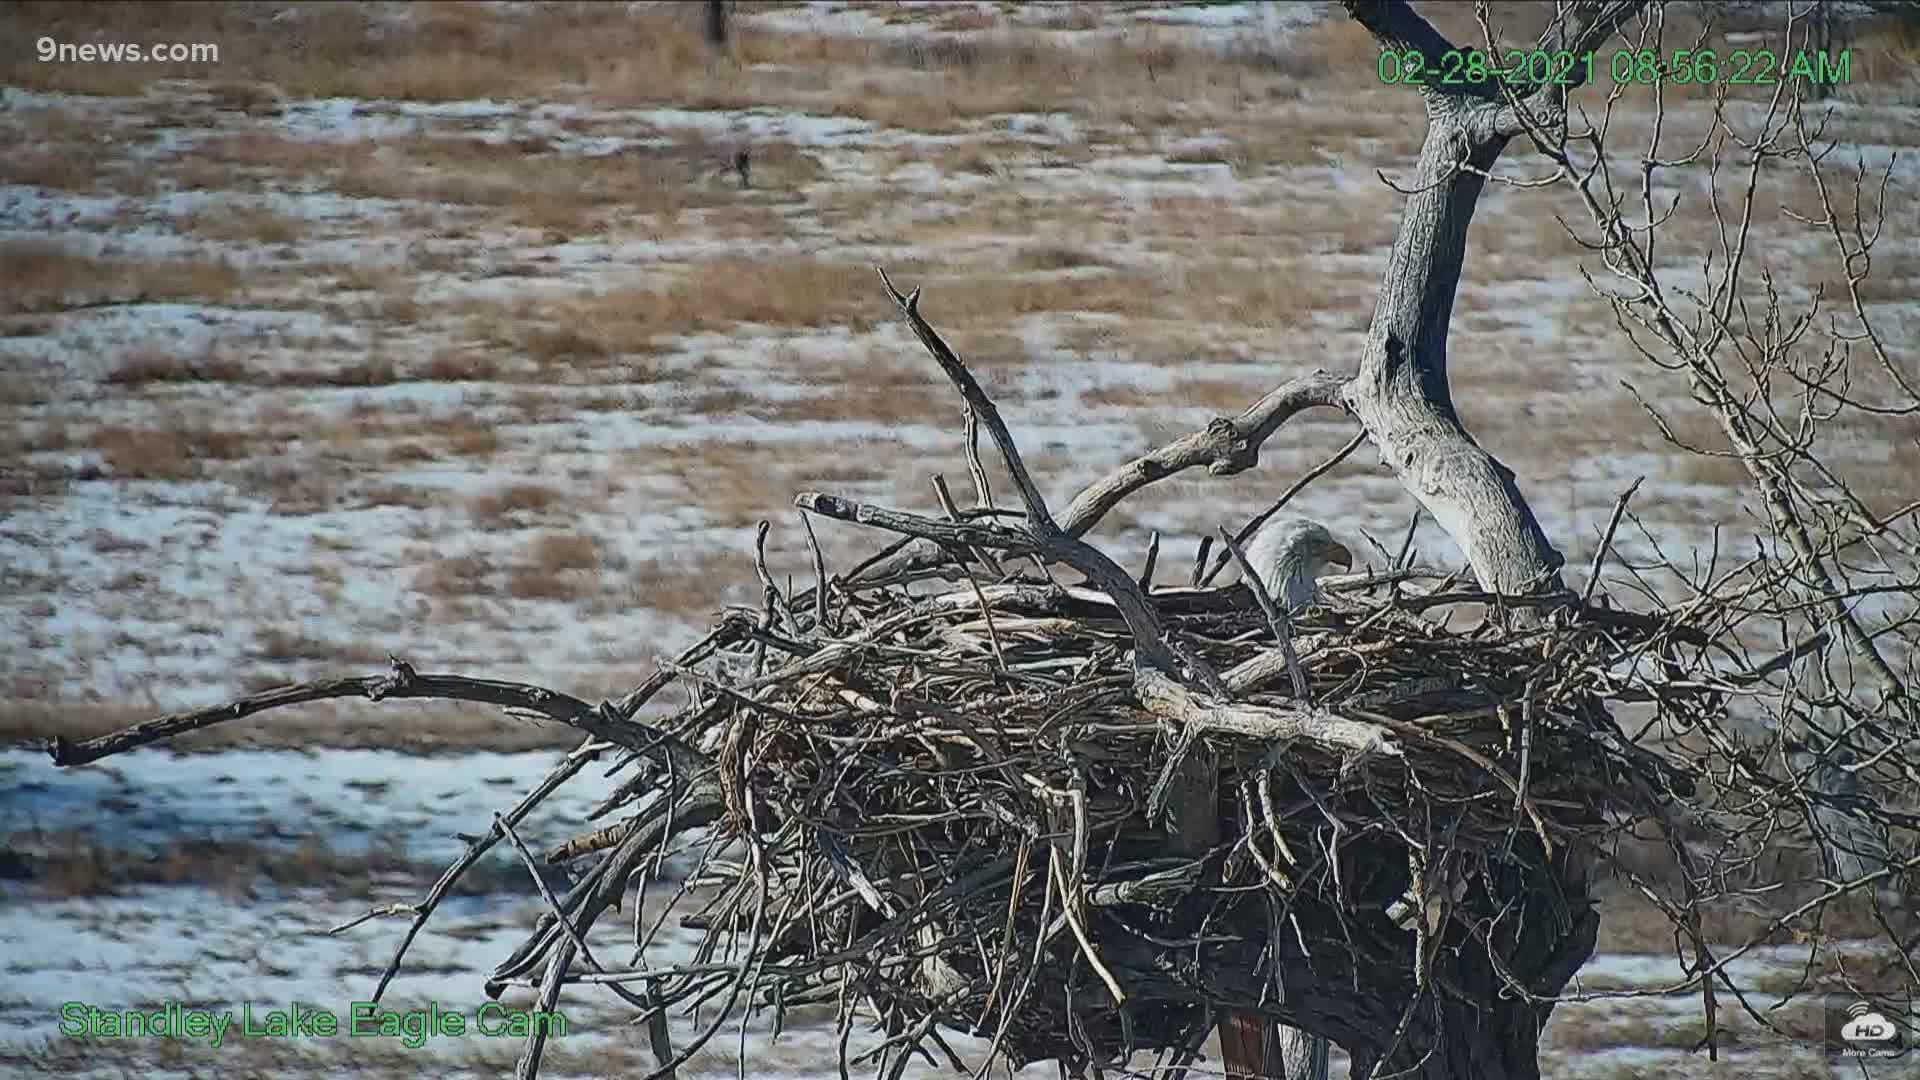 The Standley Lake eagle female laid the egg on Saturday. If all goes well, the egg will hatch in late March.